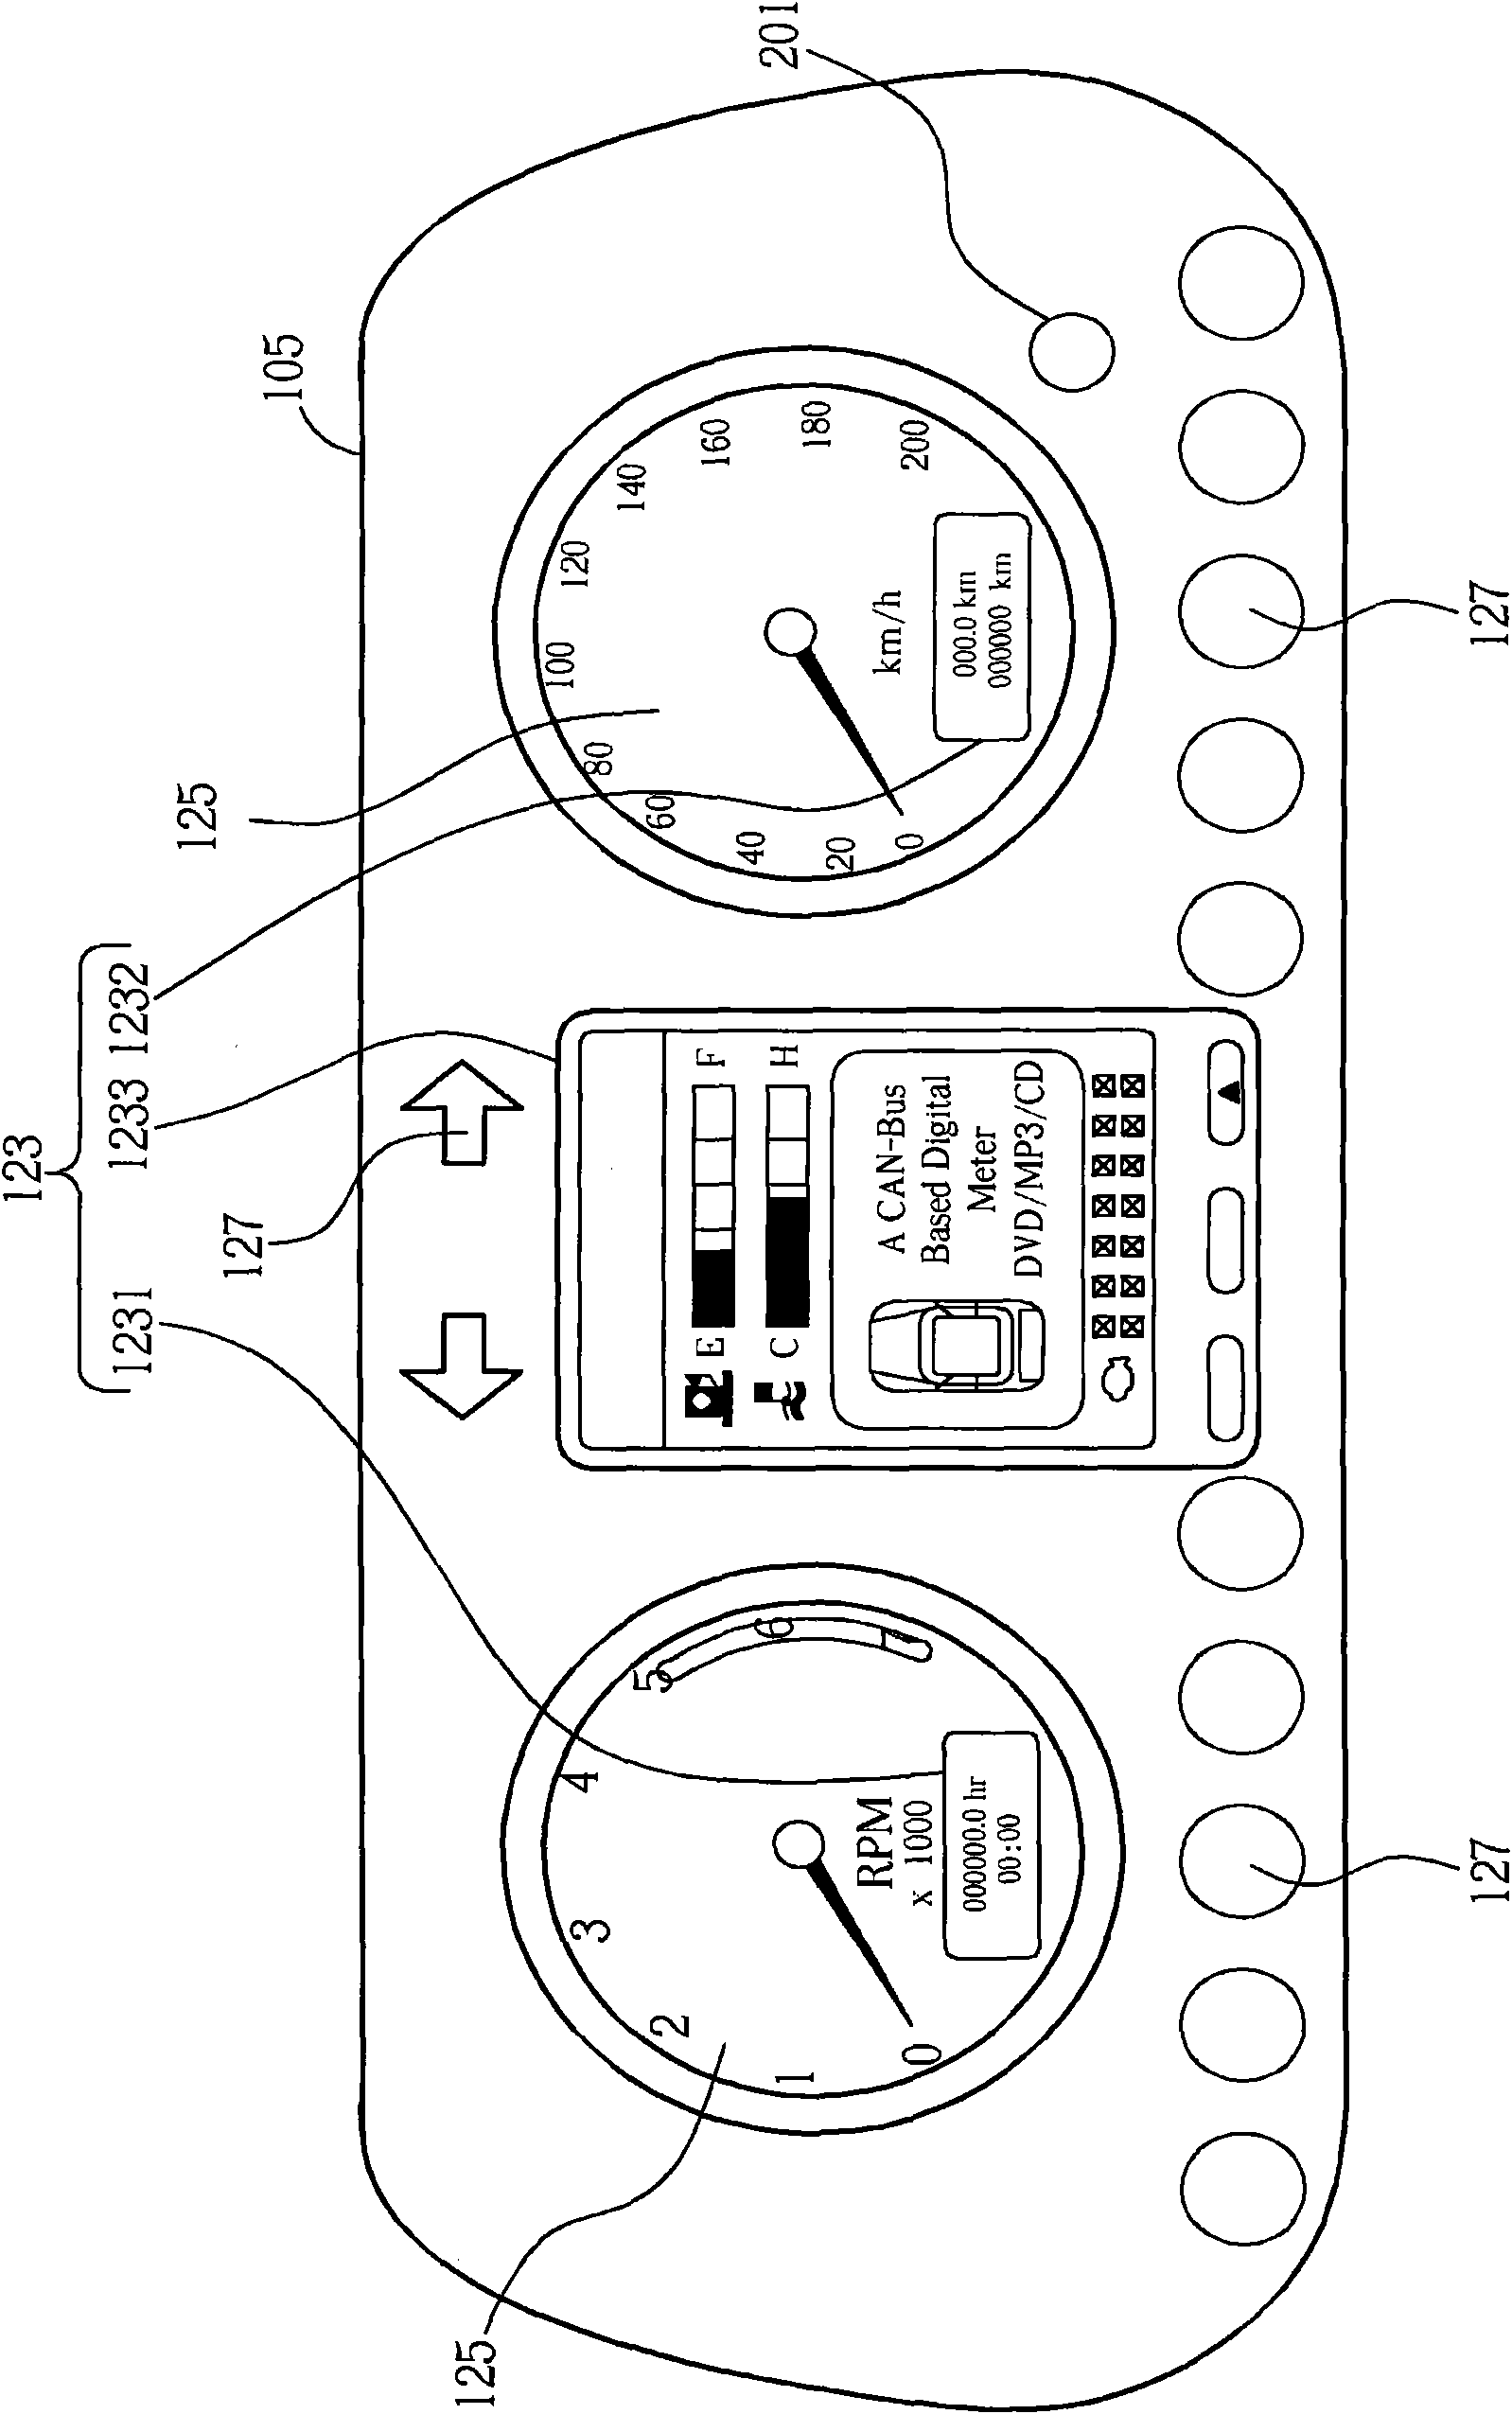 Vehicle instrument system employing controller local area network bus